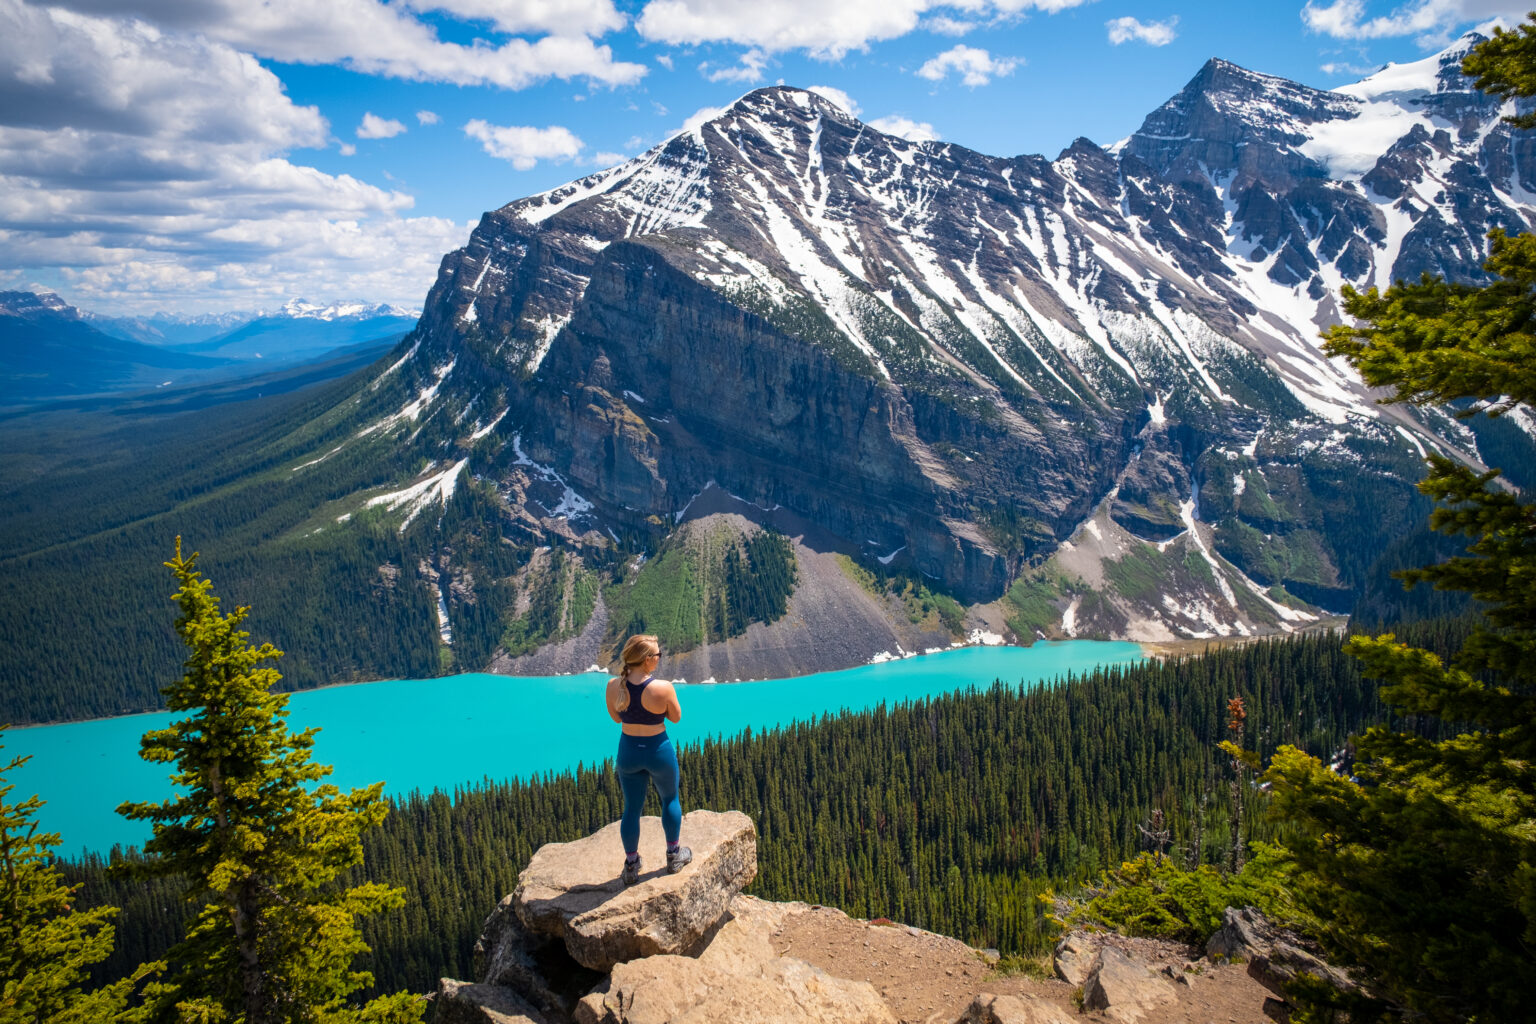 The Ultimate Guide to Lake Louise (The Complete Summer AND Winter Guide)